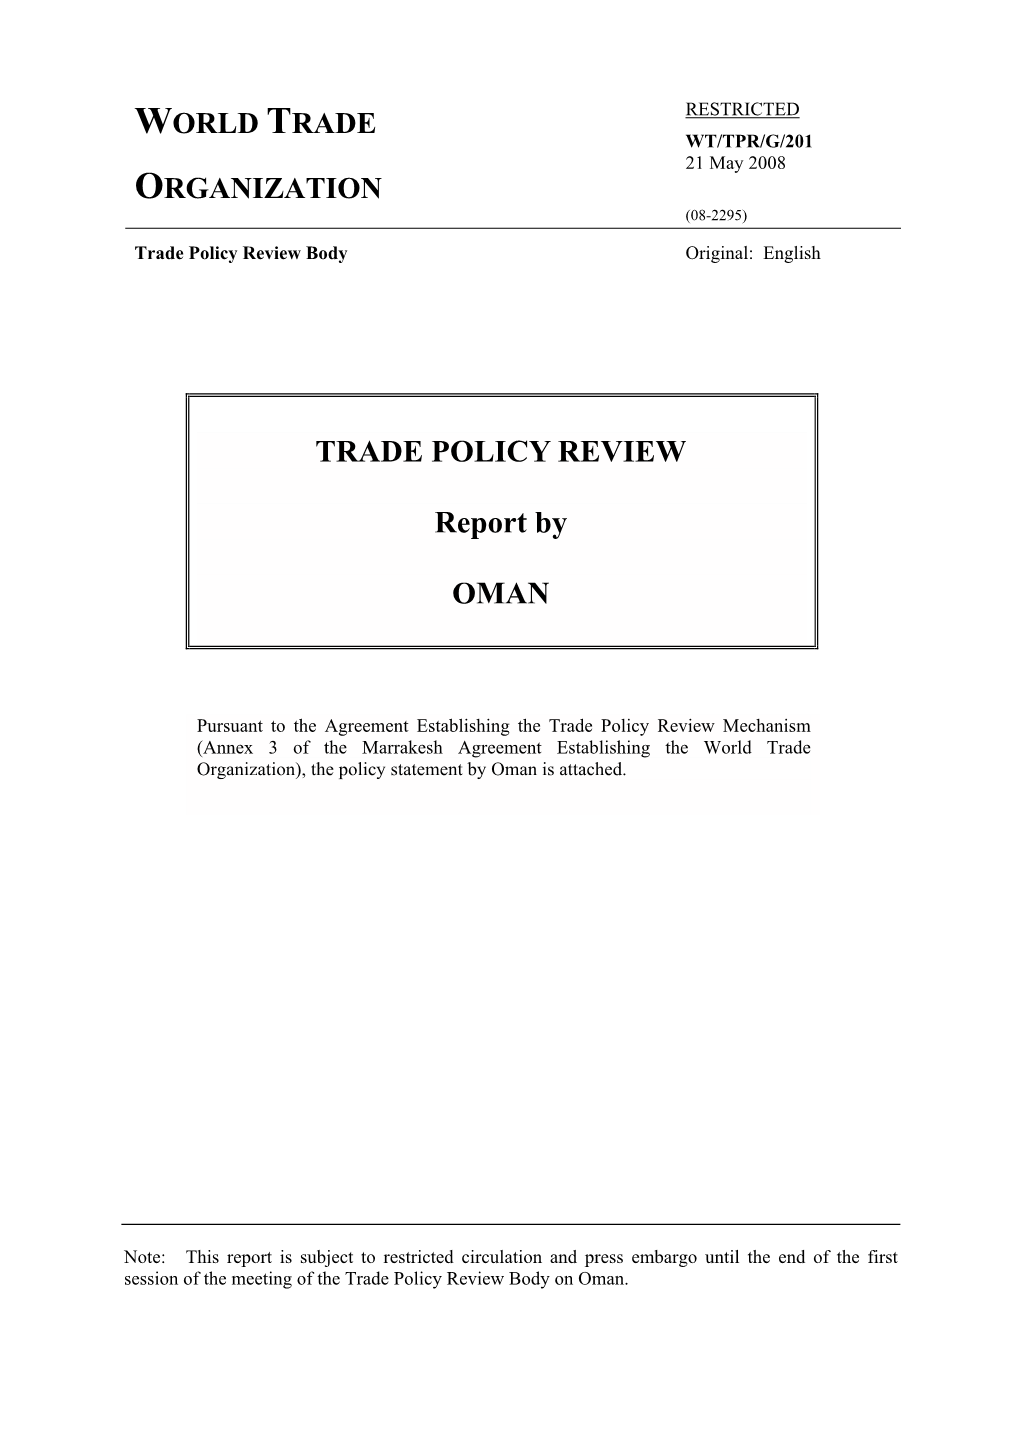 TRADE POLICY REVIEW Report by OMAN